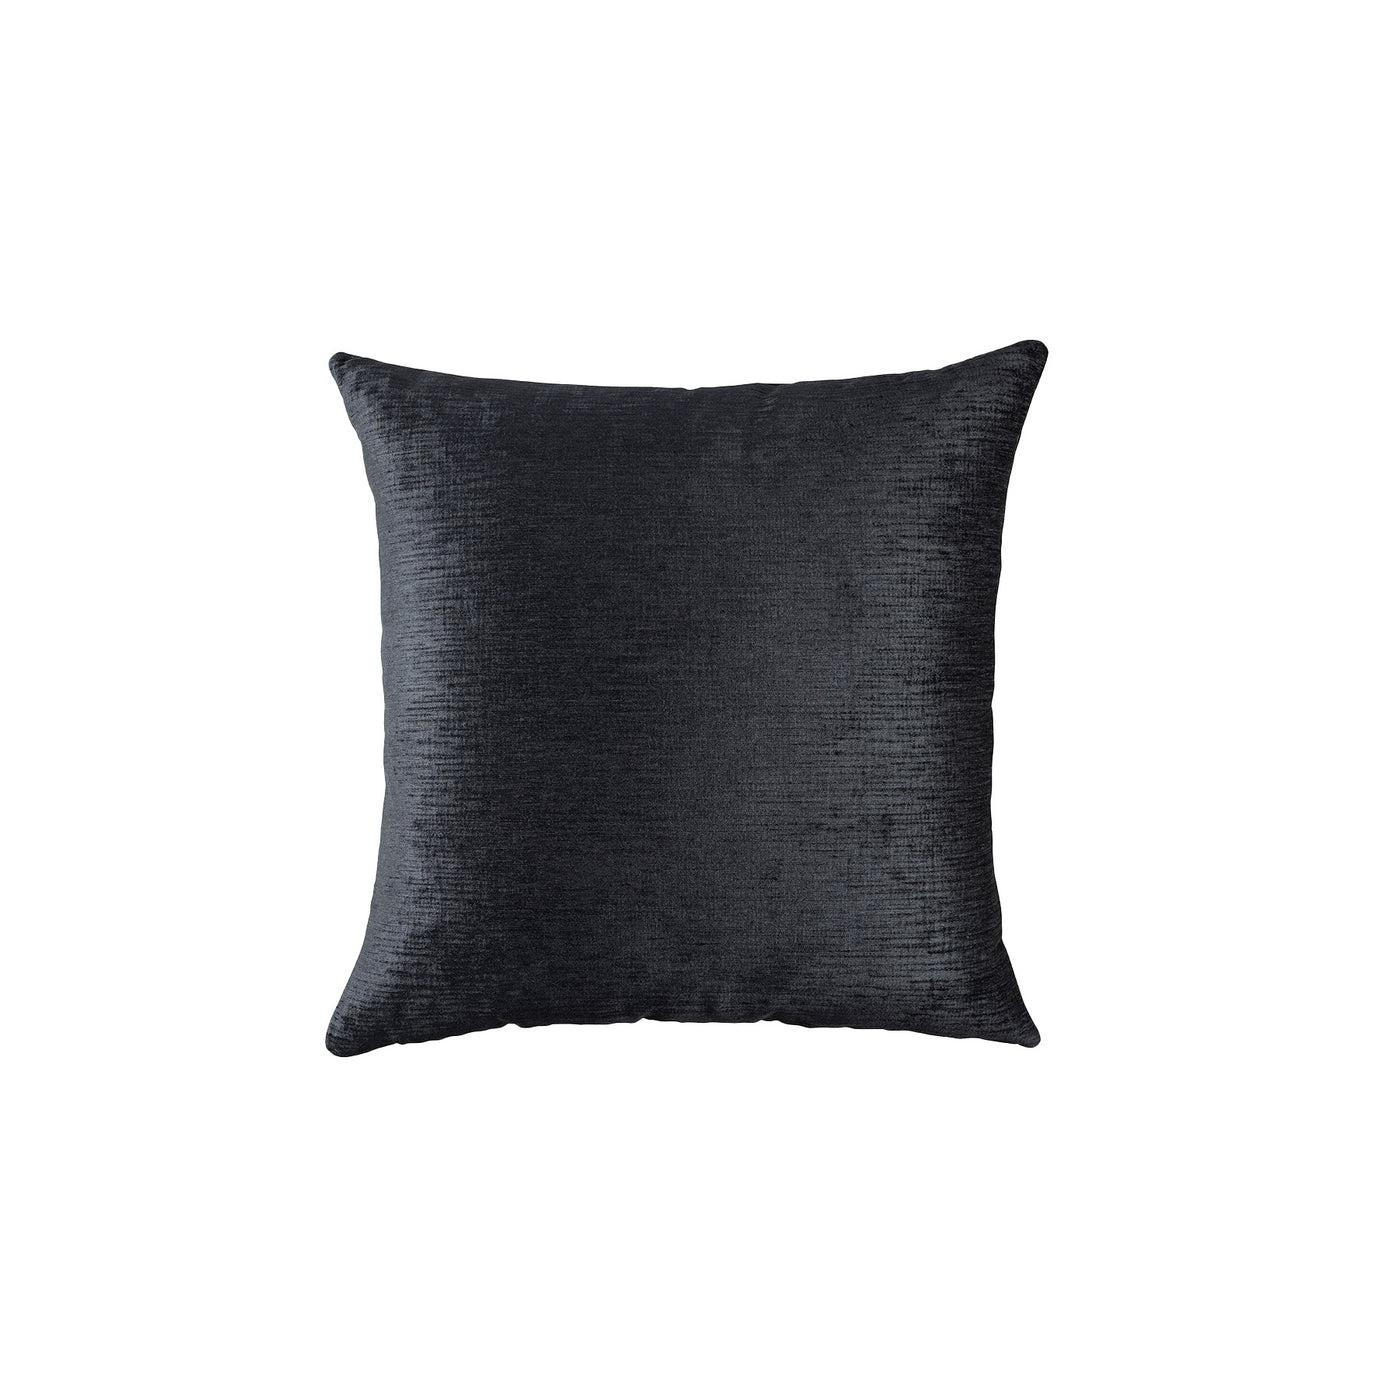 Ava Charcoal Large Square Pillow (24x24)